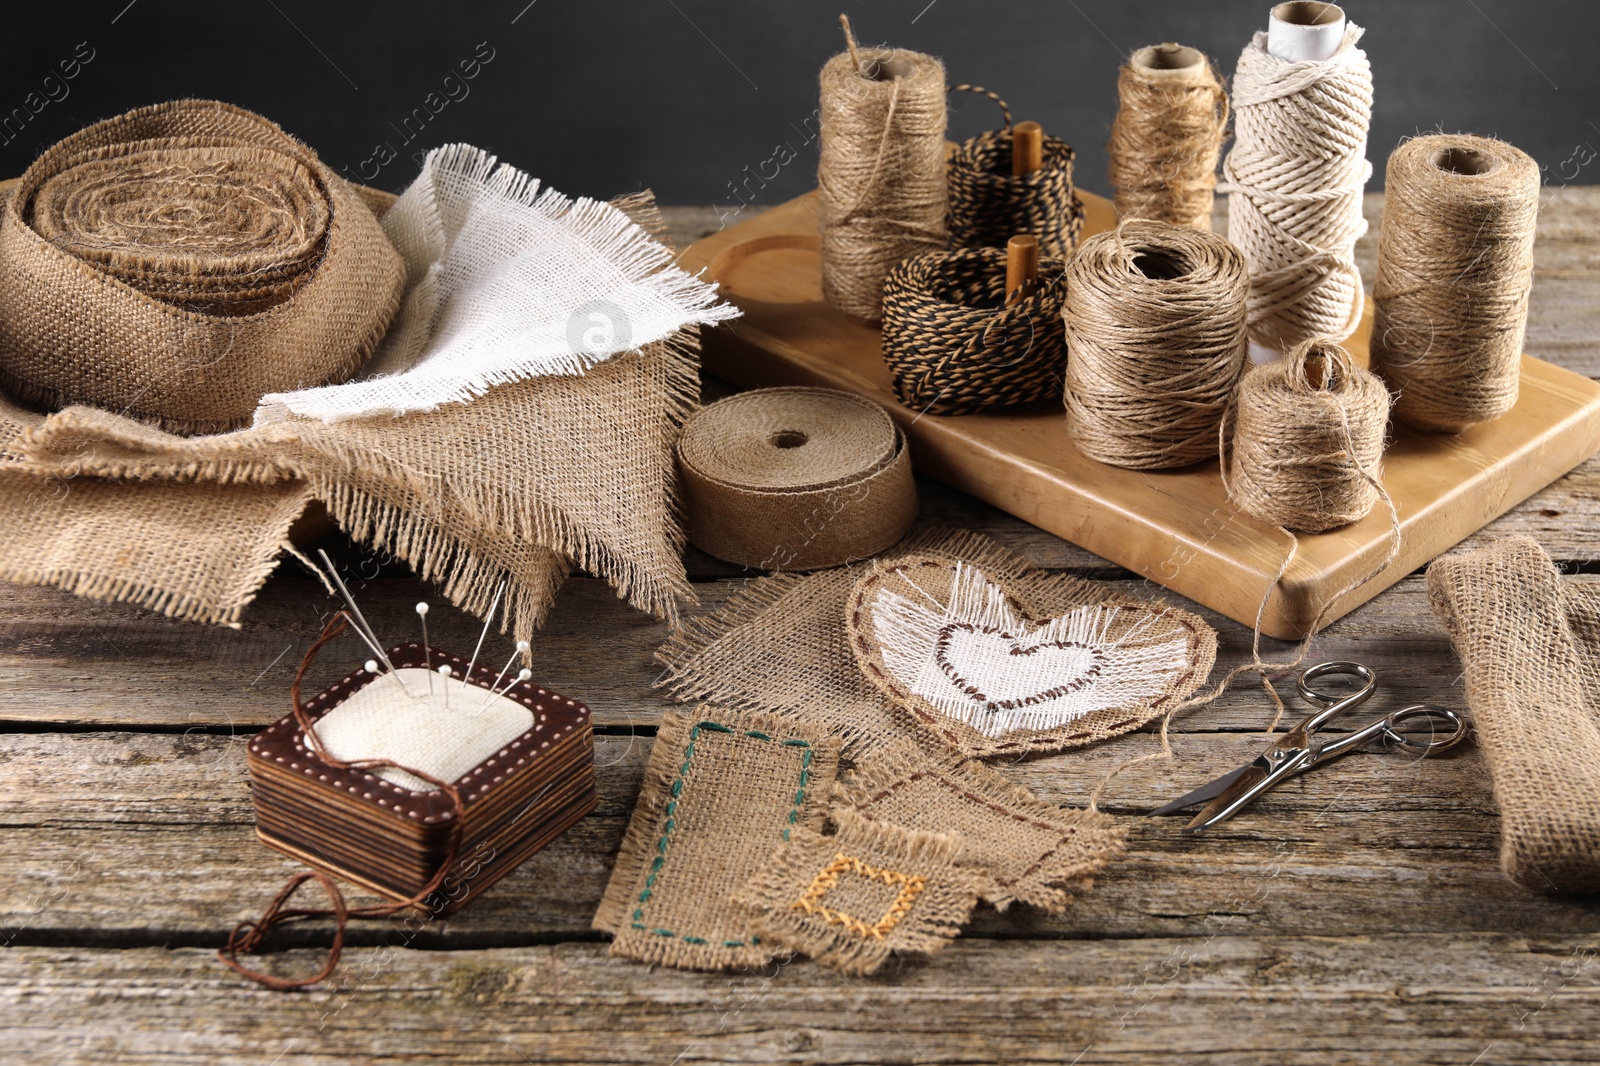 Photo of Pieces of burlap fabric, spools of twine and different sewing tools on wooden table